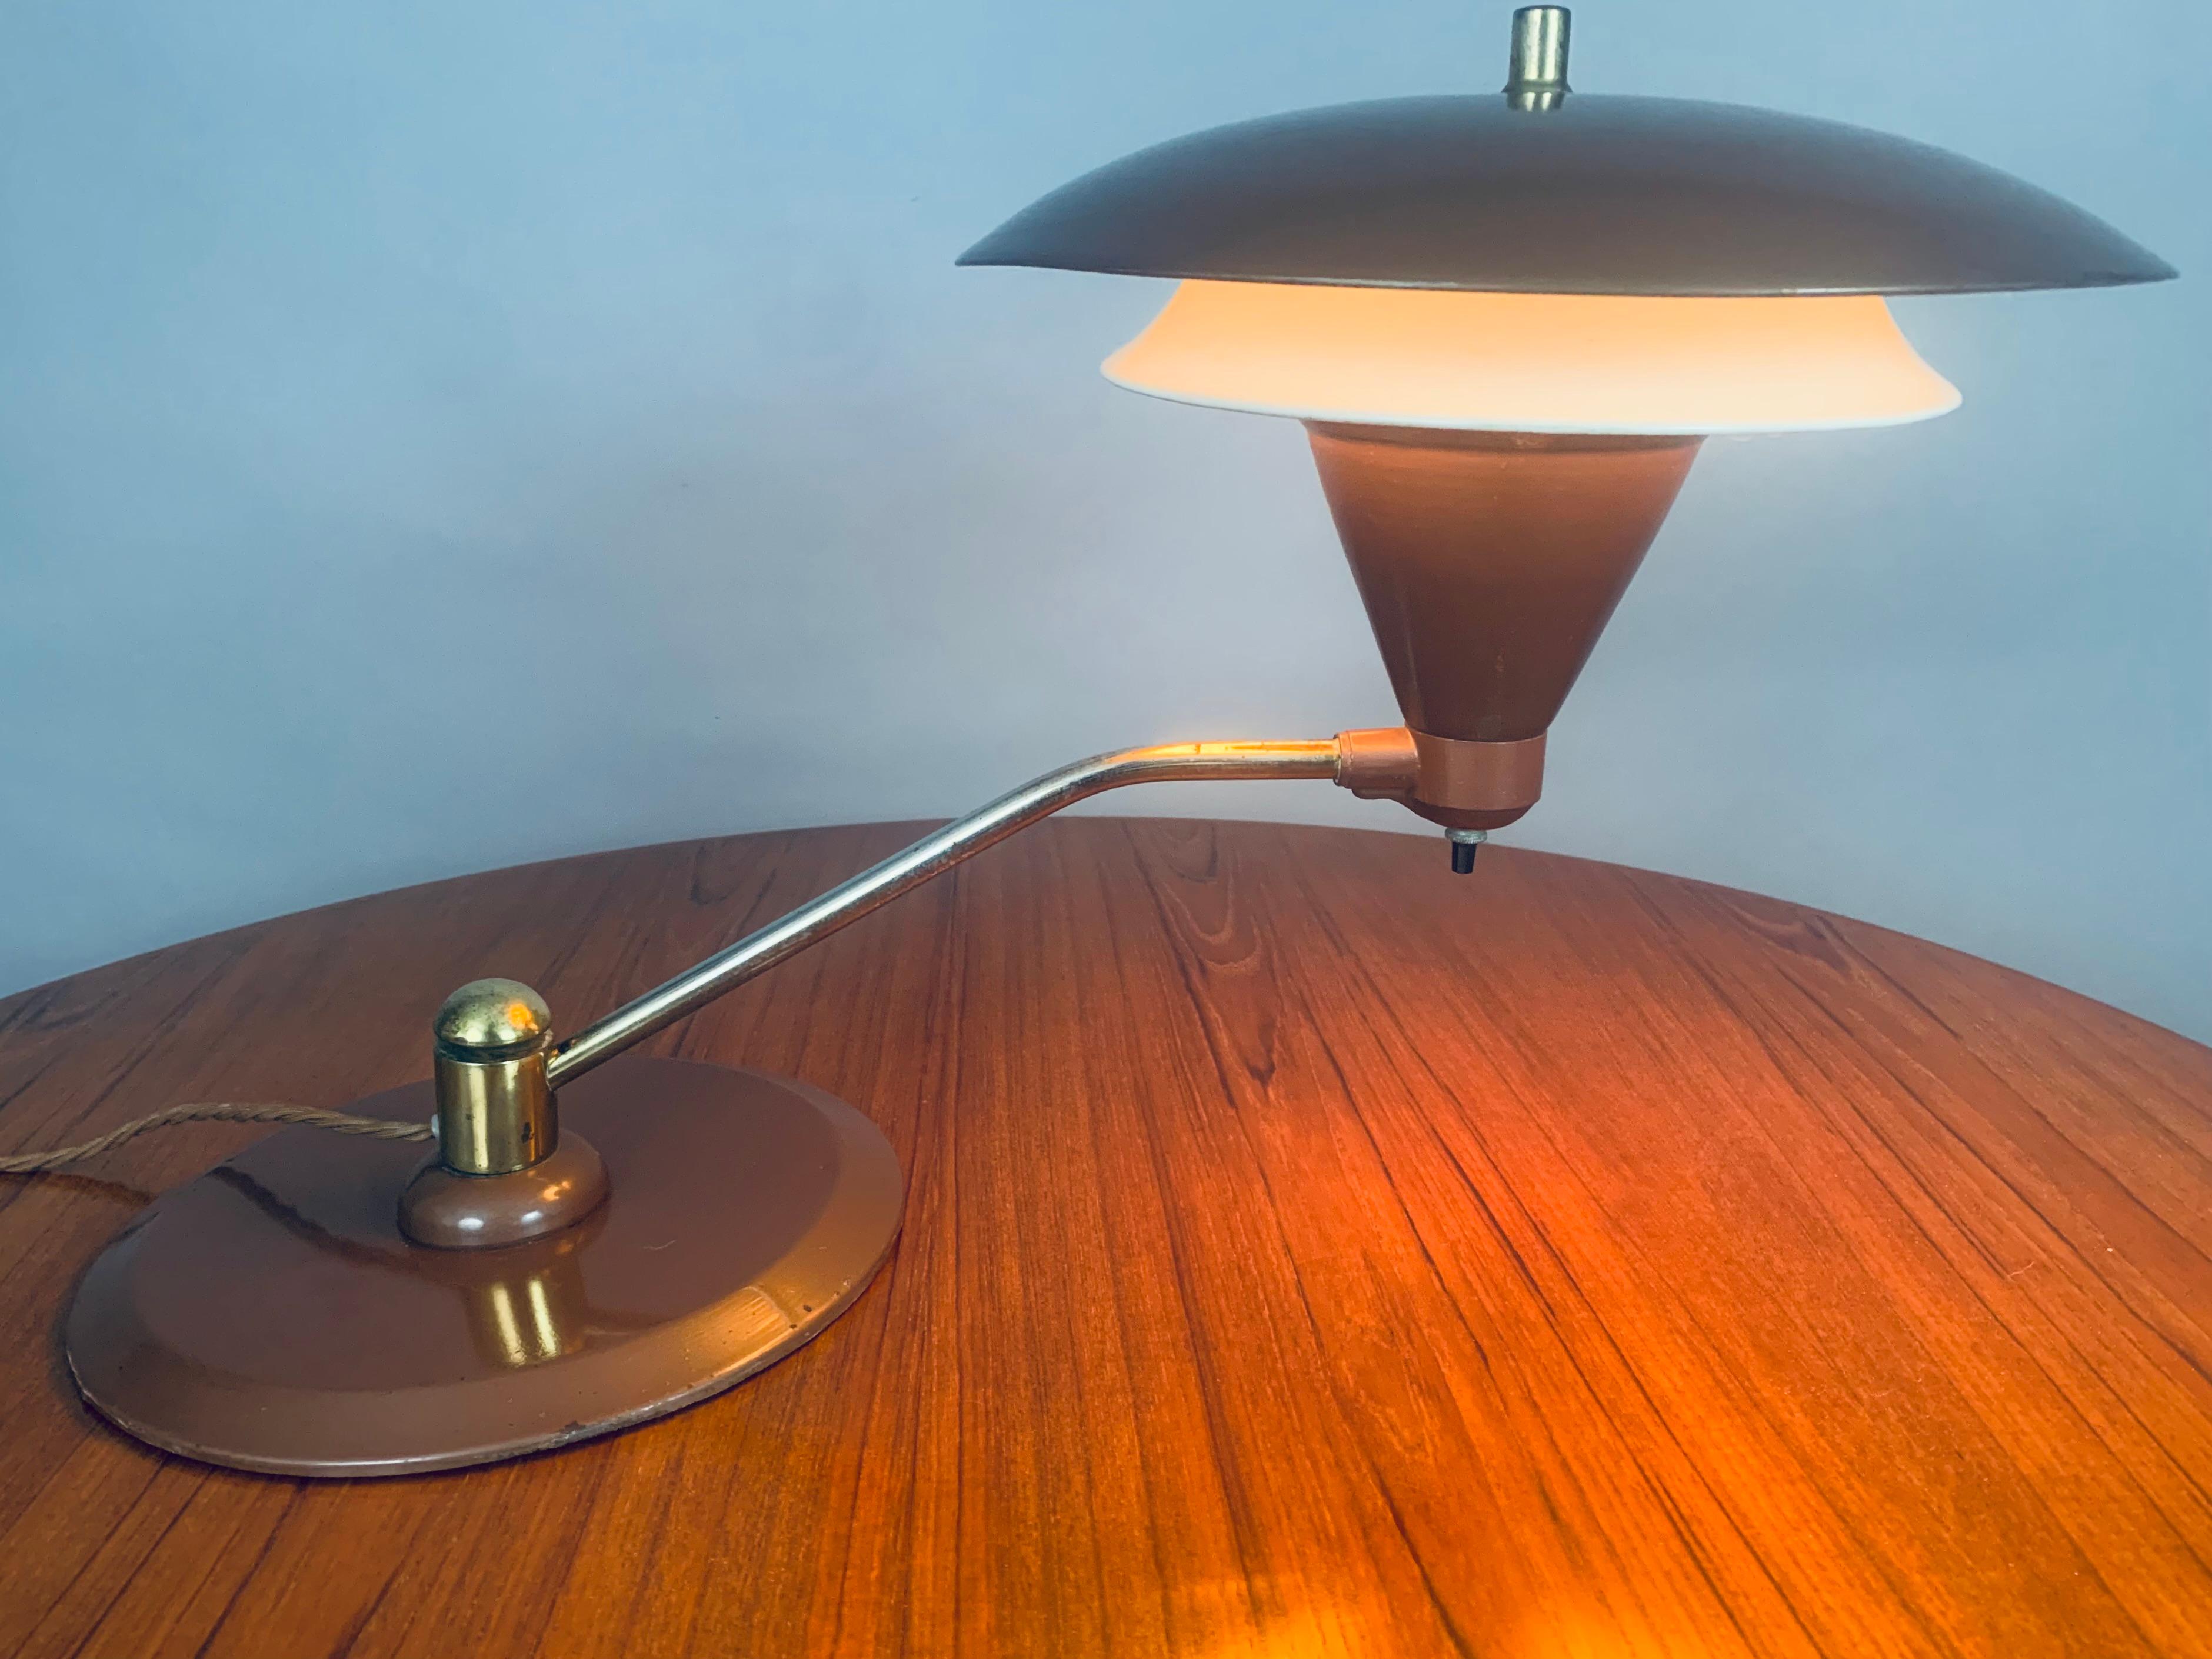 1950s mid century flying saucer double-shade desk lamp manufactured by Art Speciality Co, Chicago. This wonderful Art Deco style desk lamp features a heavy enamelled supporting brown base with a matching upper canopy shade and conical shaped bulb